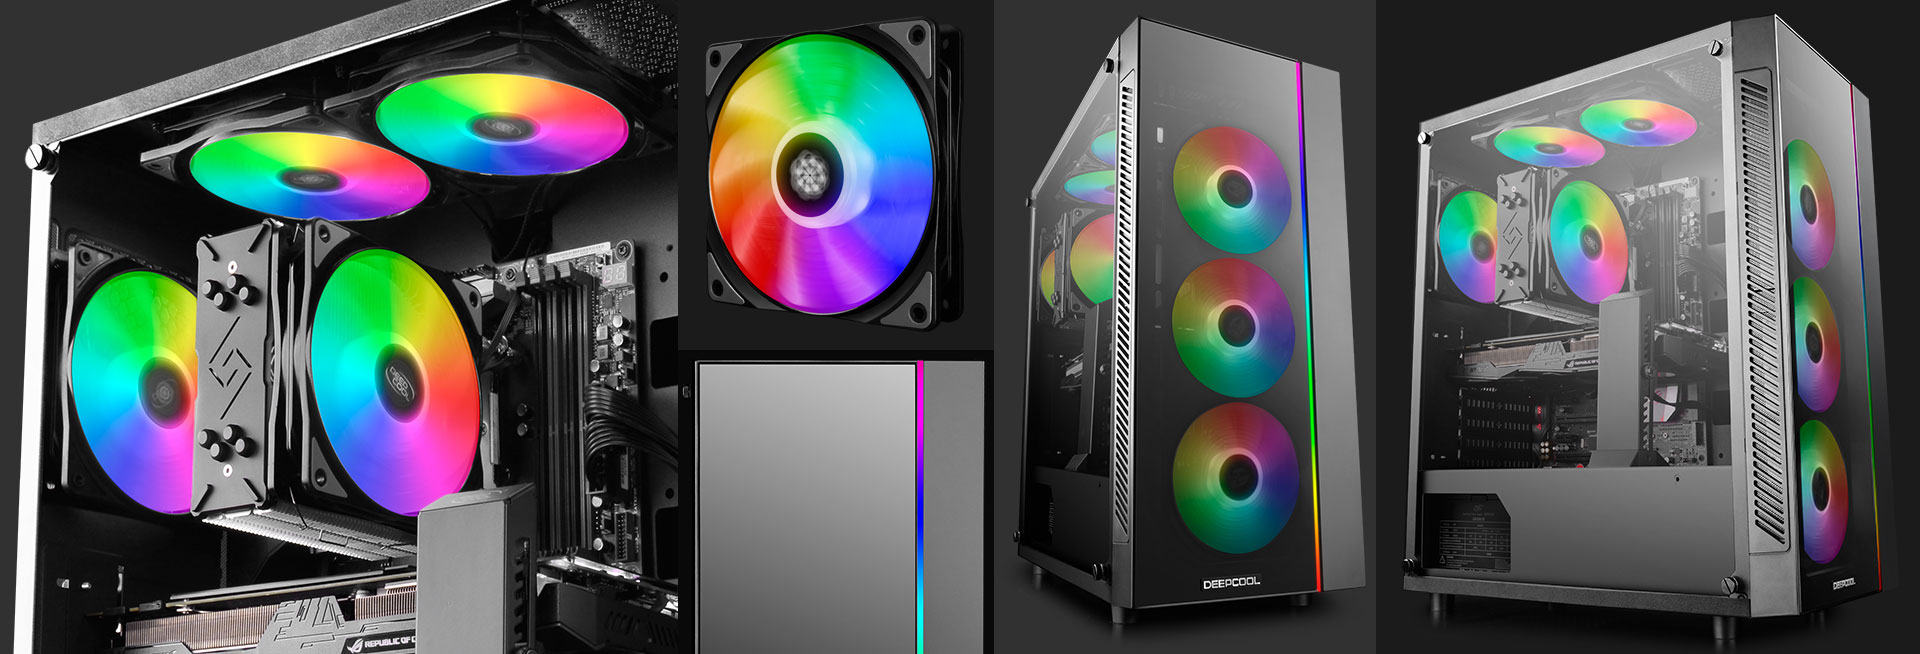 different shots and angles of the deepcool MATREXX 55 case with rainbow RGB-lit fans